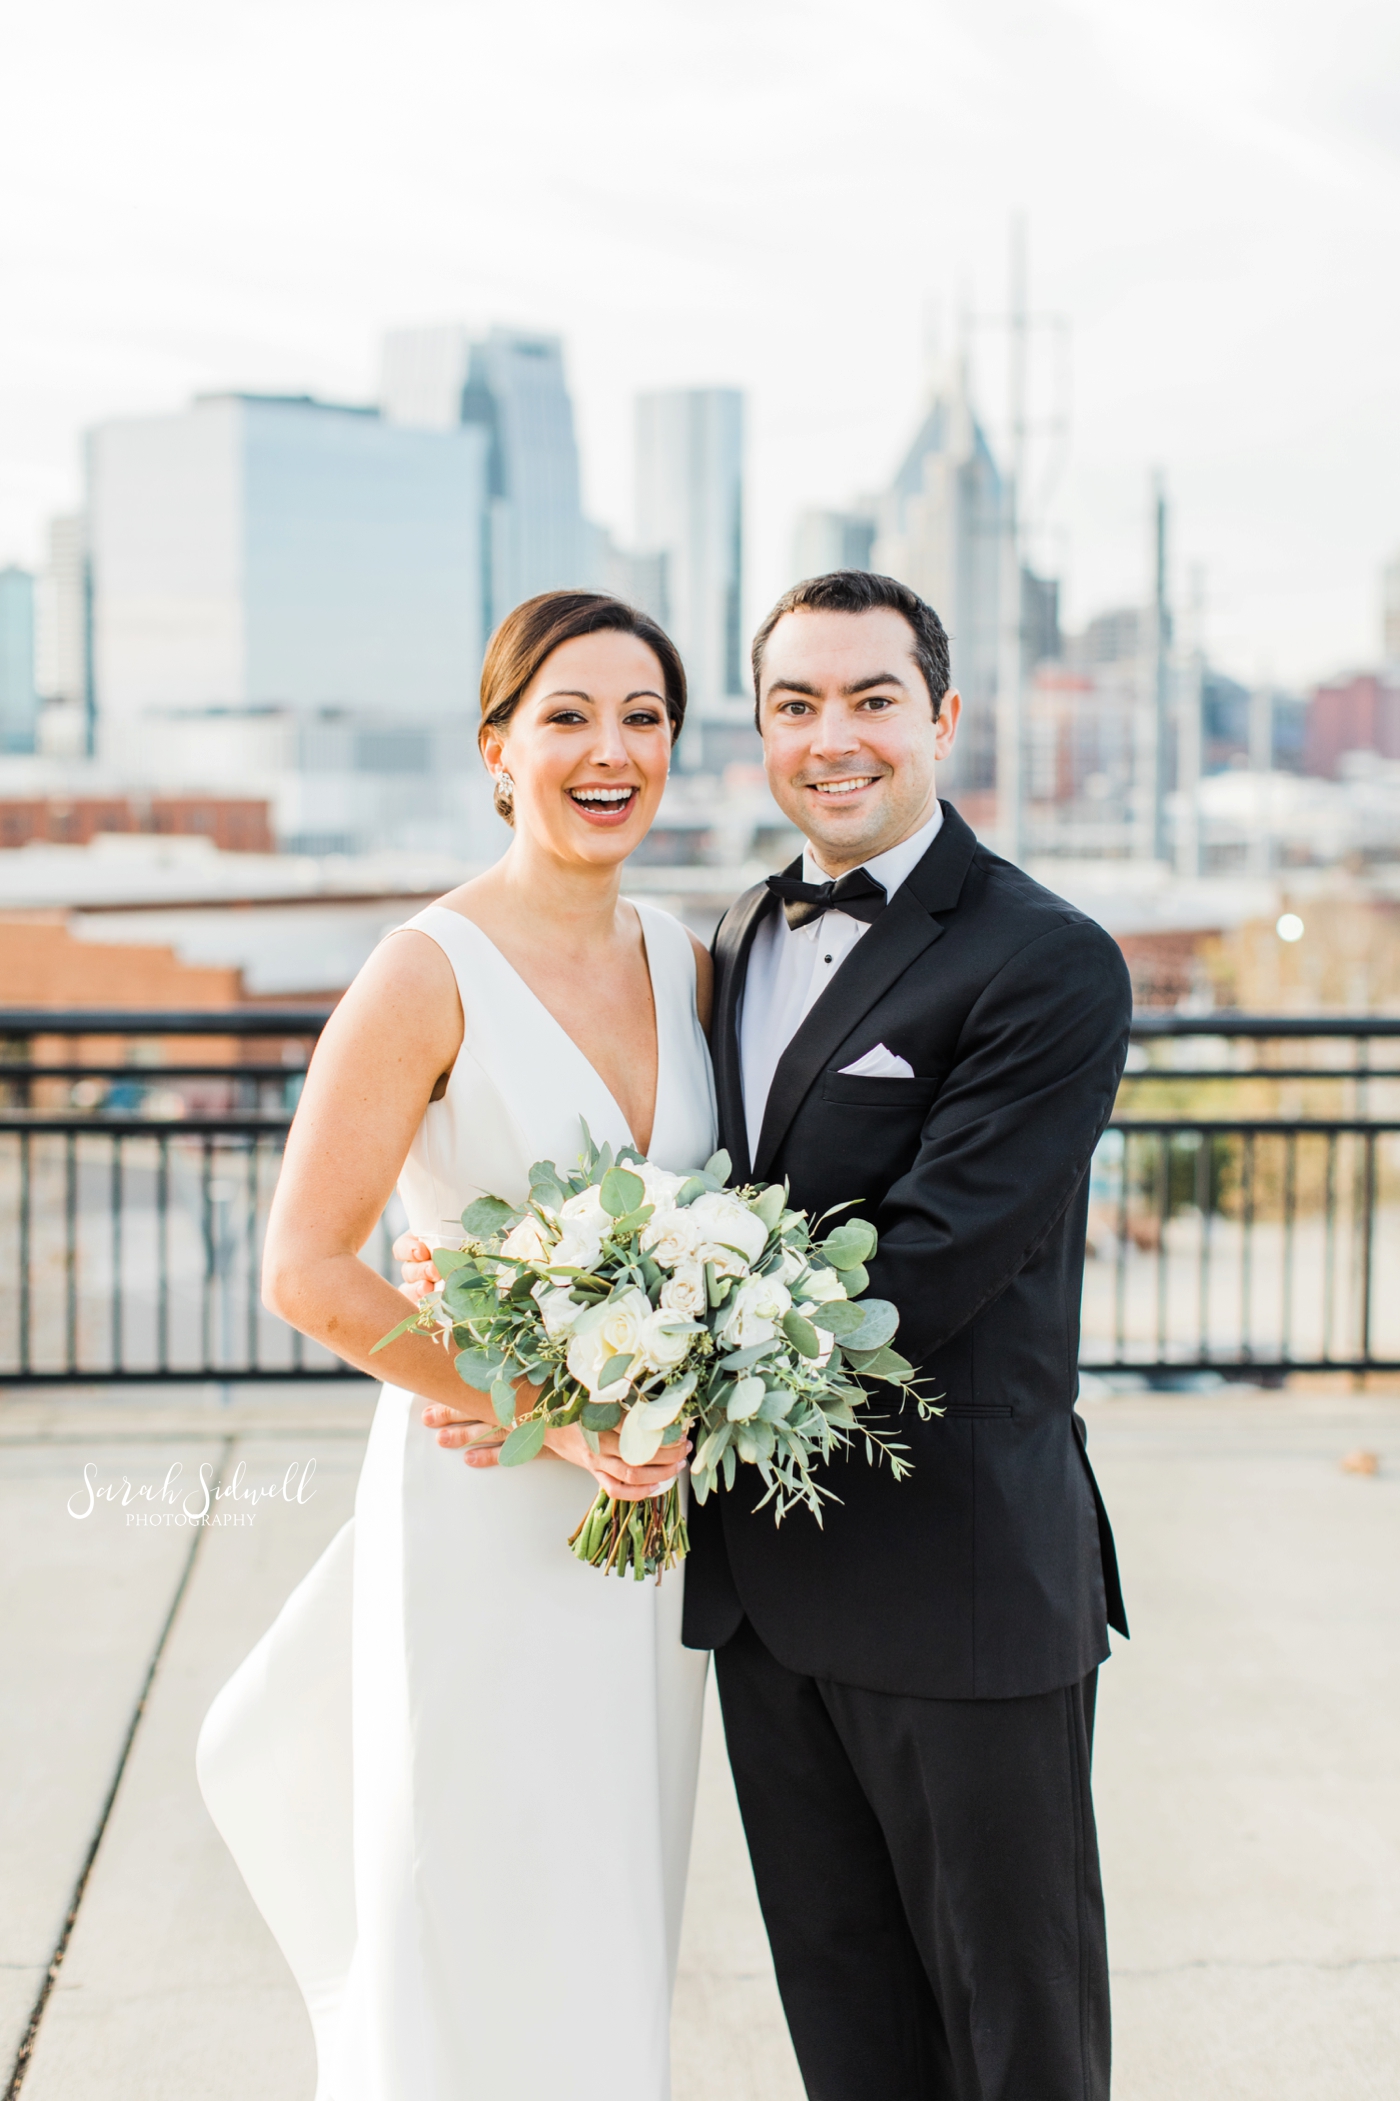 A couple pose for wedding photos | Sarah Sidwell Photography | The Bell Tower